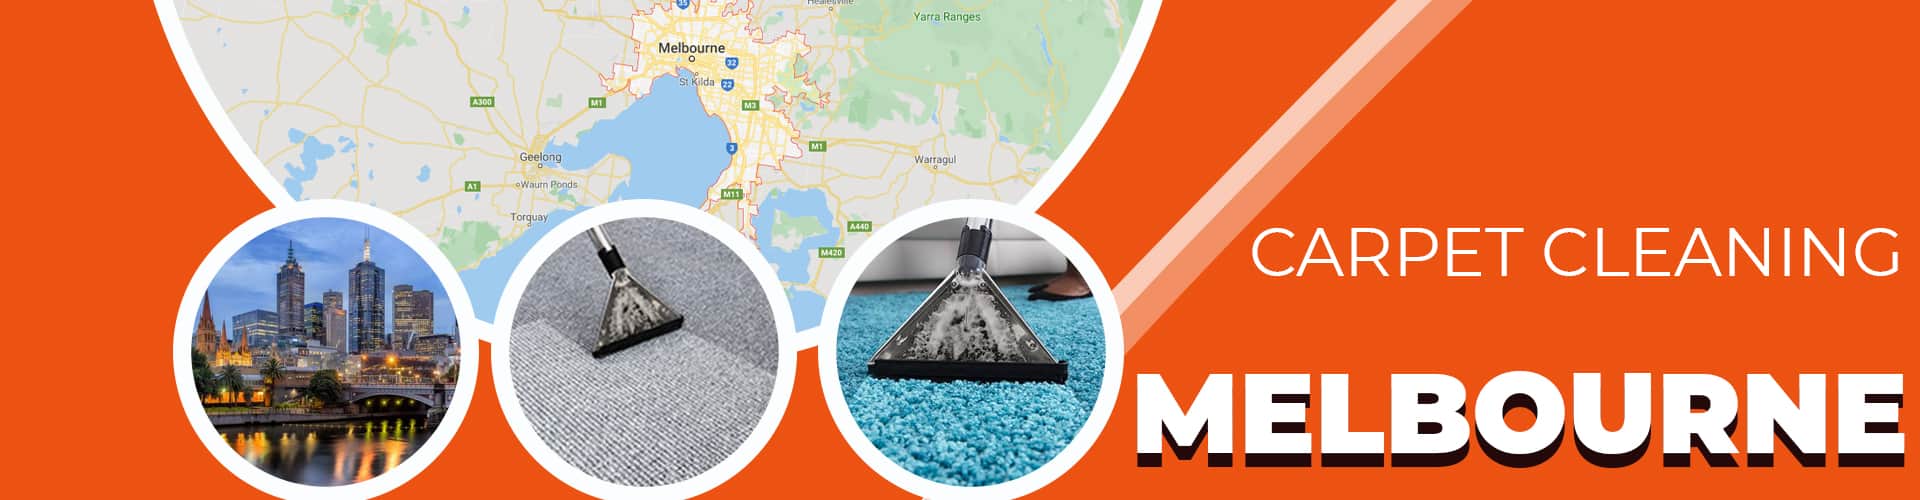 CARPET CLEANING MELBOURNE